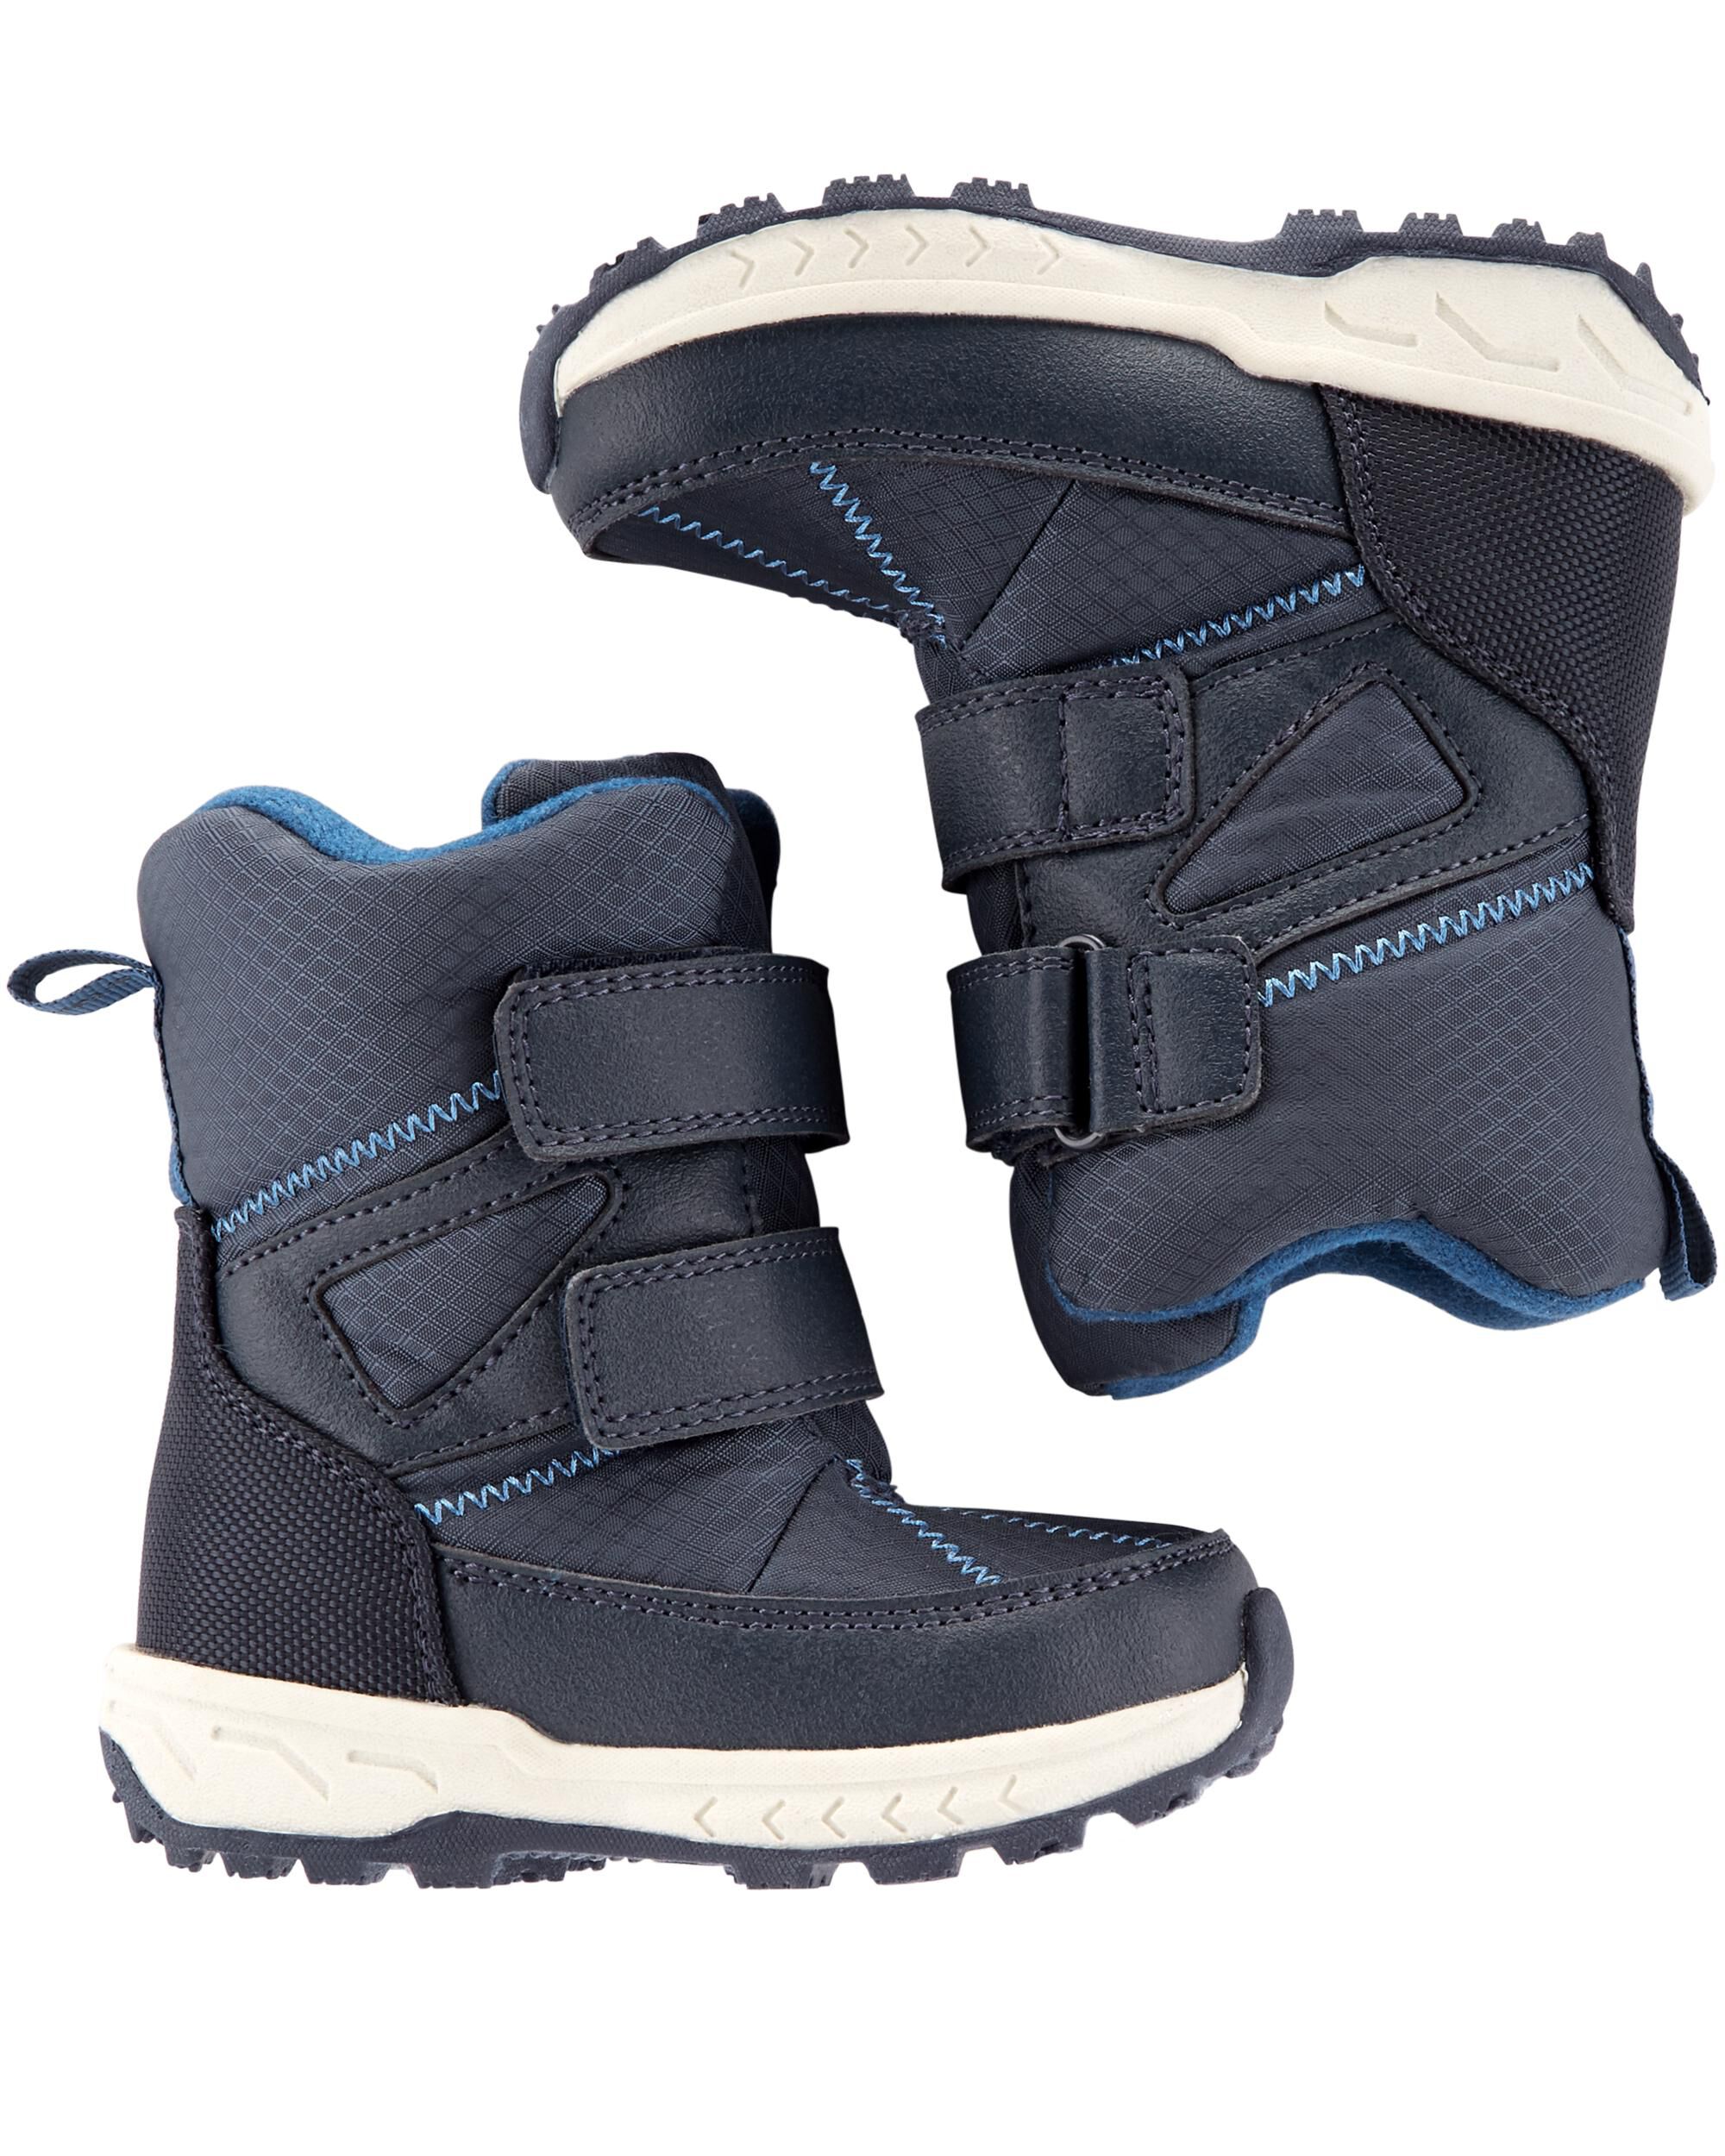 carters boys snow boots